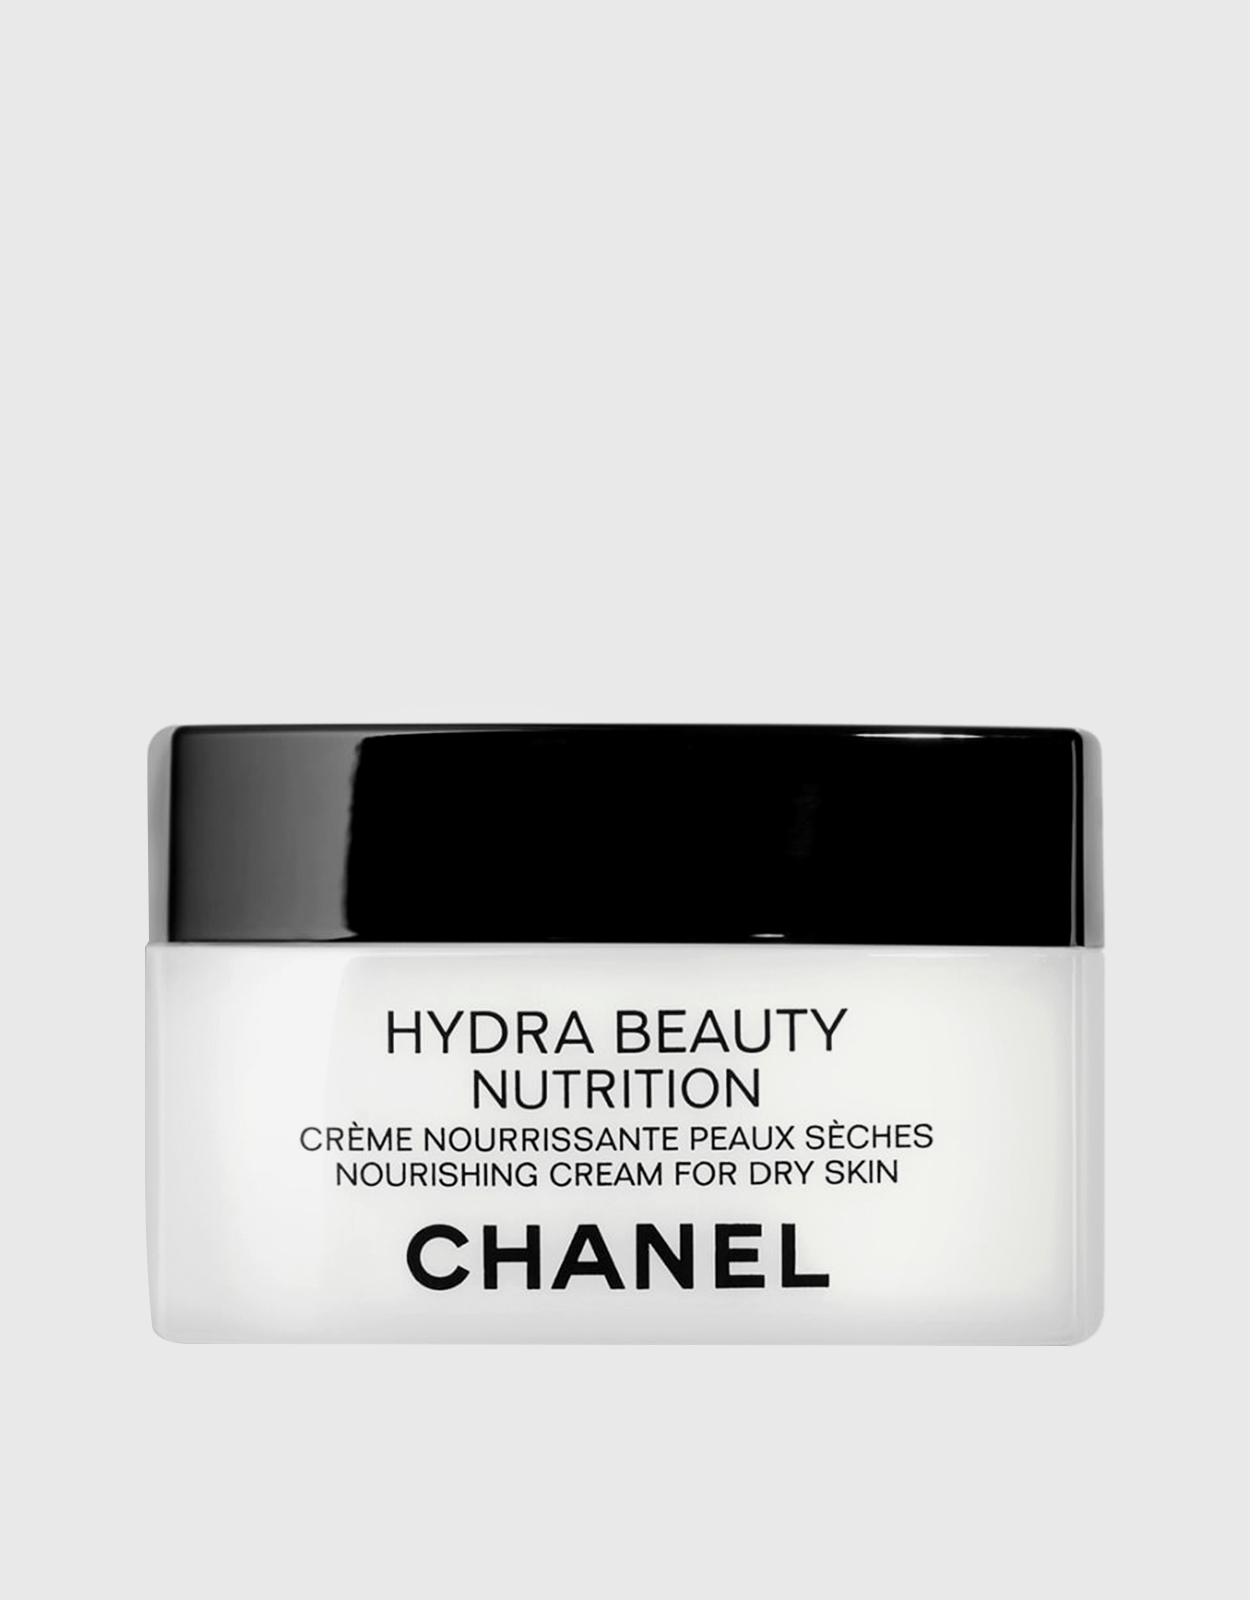 HYDRA BEAUTY From CHANEL